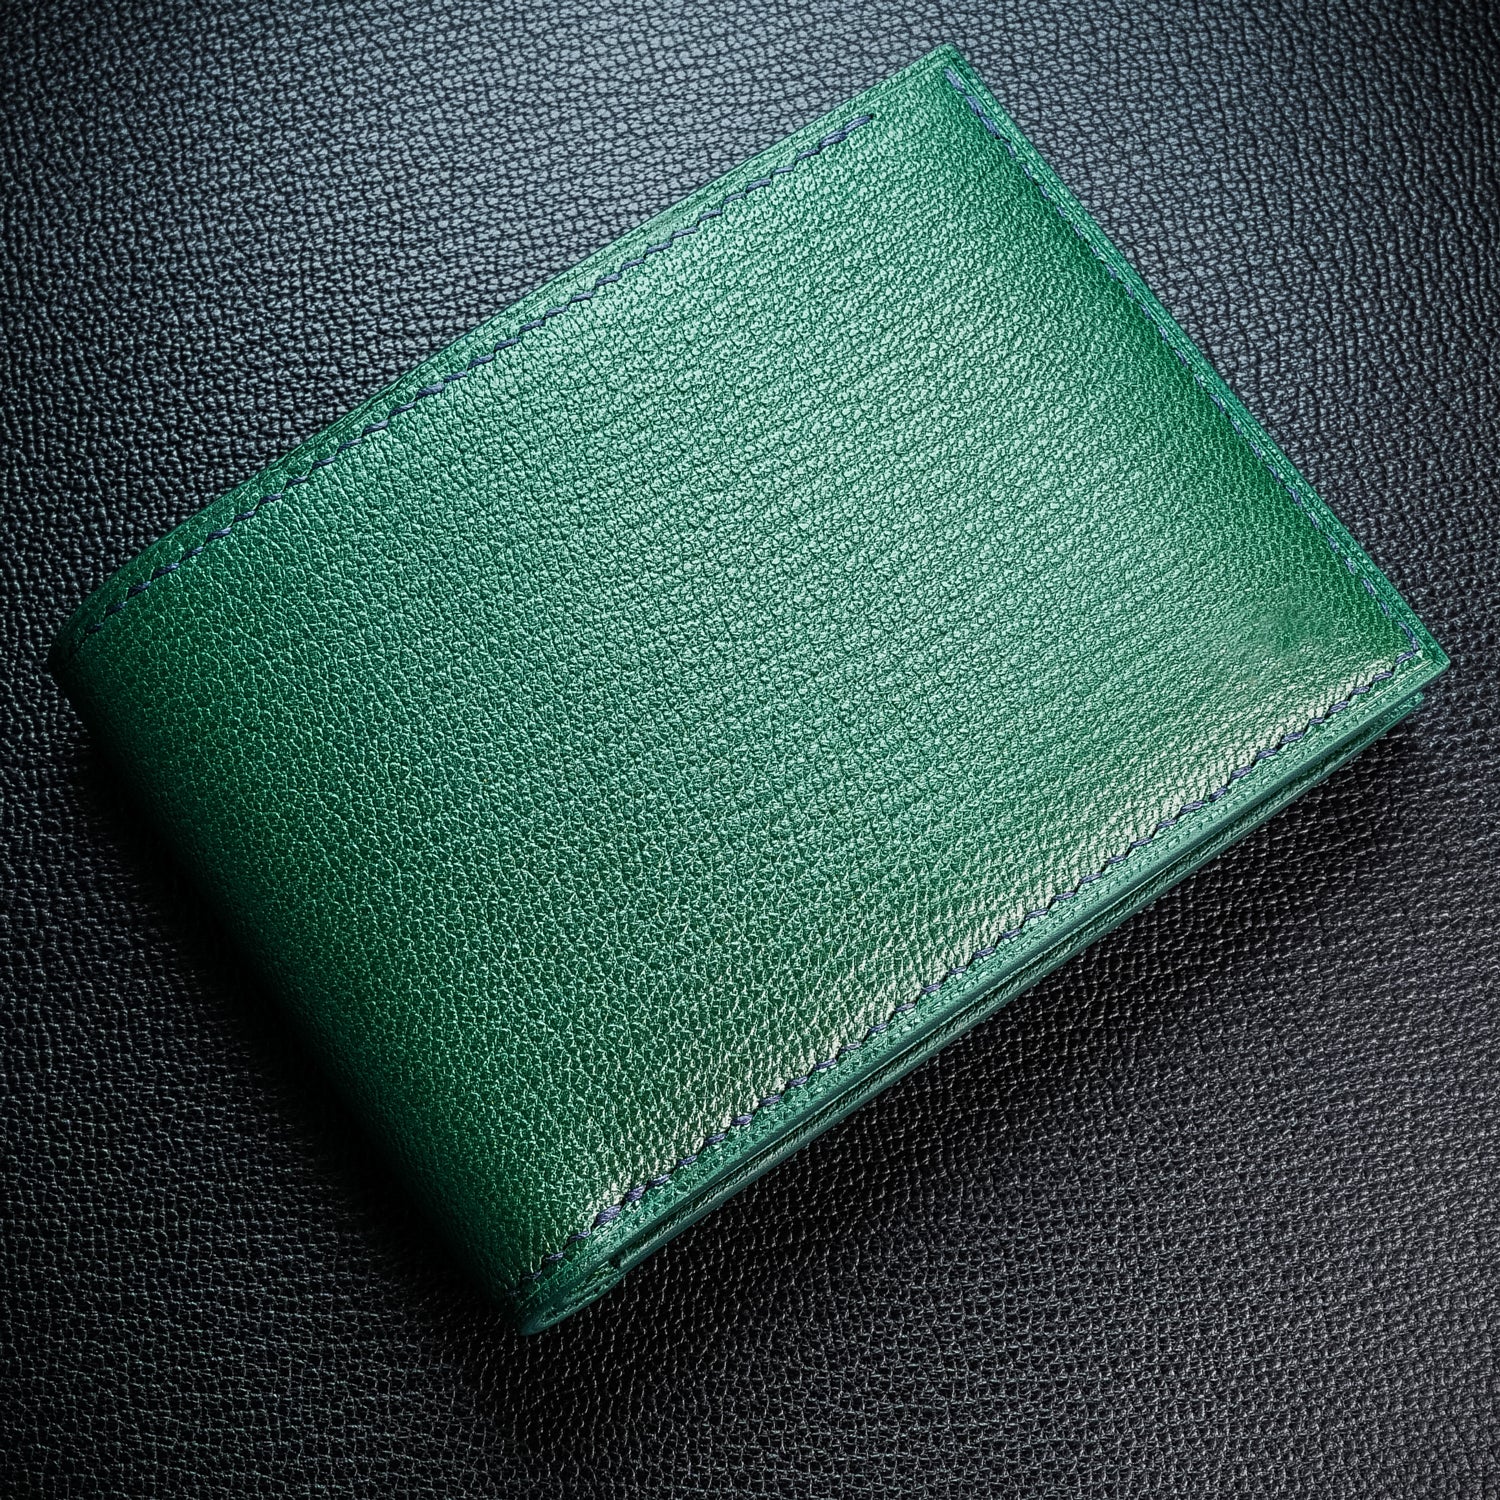 Leather Green Wallet - Picasso And Co - Shop Now